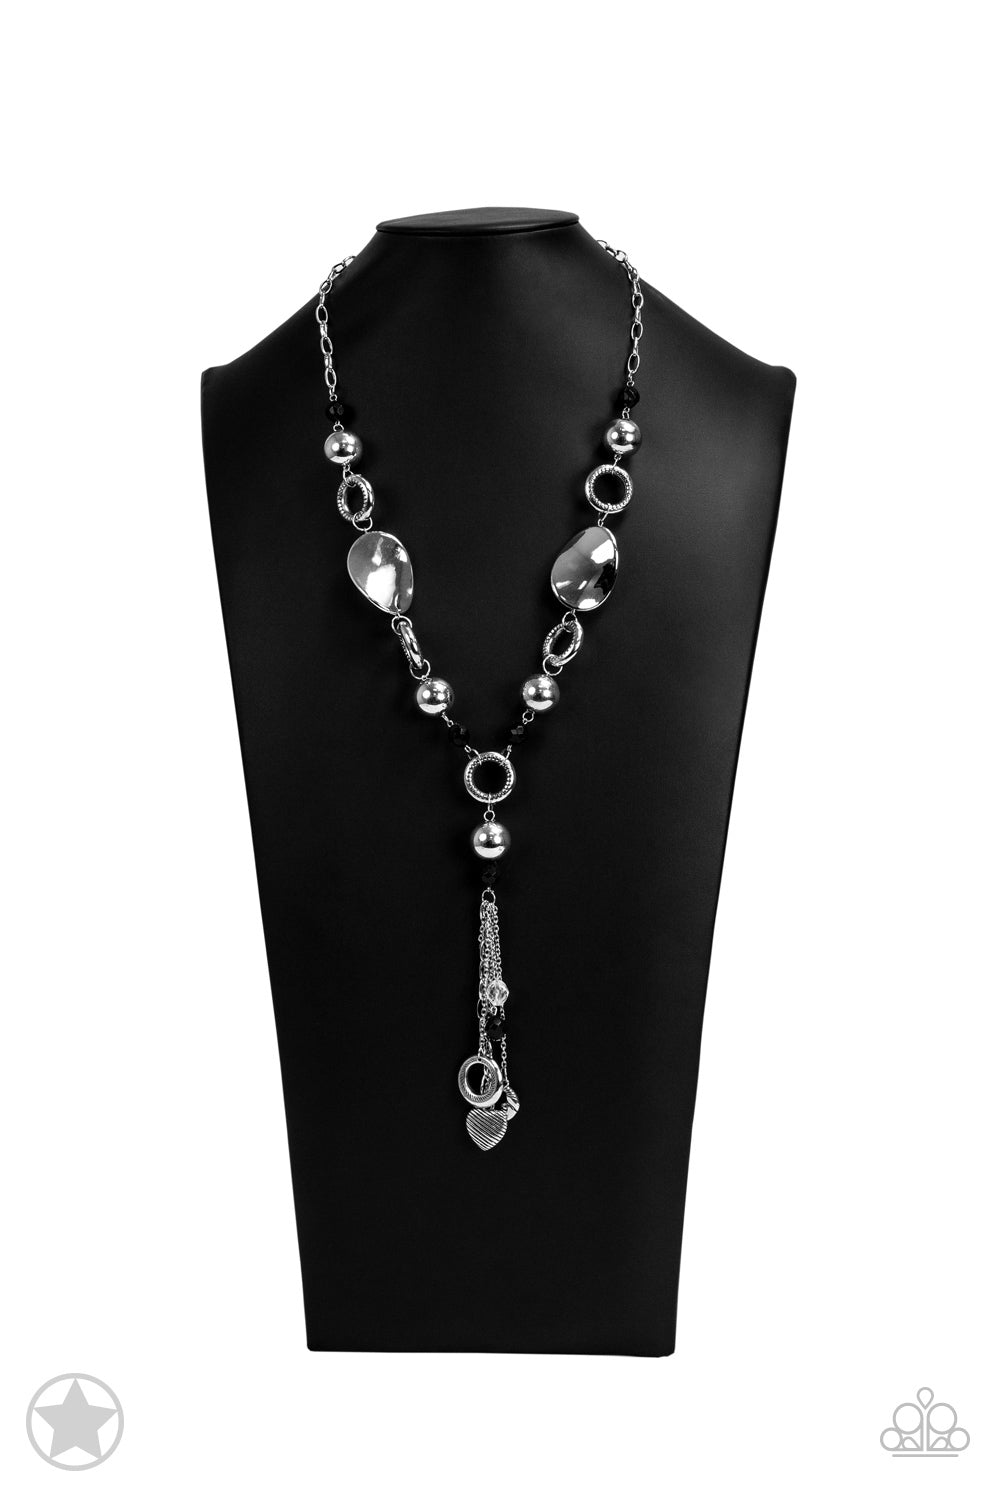 "Total Eclipse of the Heart" - Black #2021 - Paparazzi Accessories